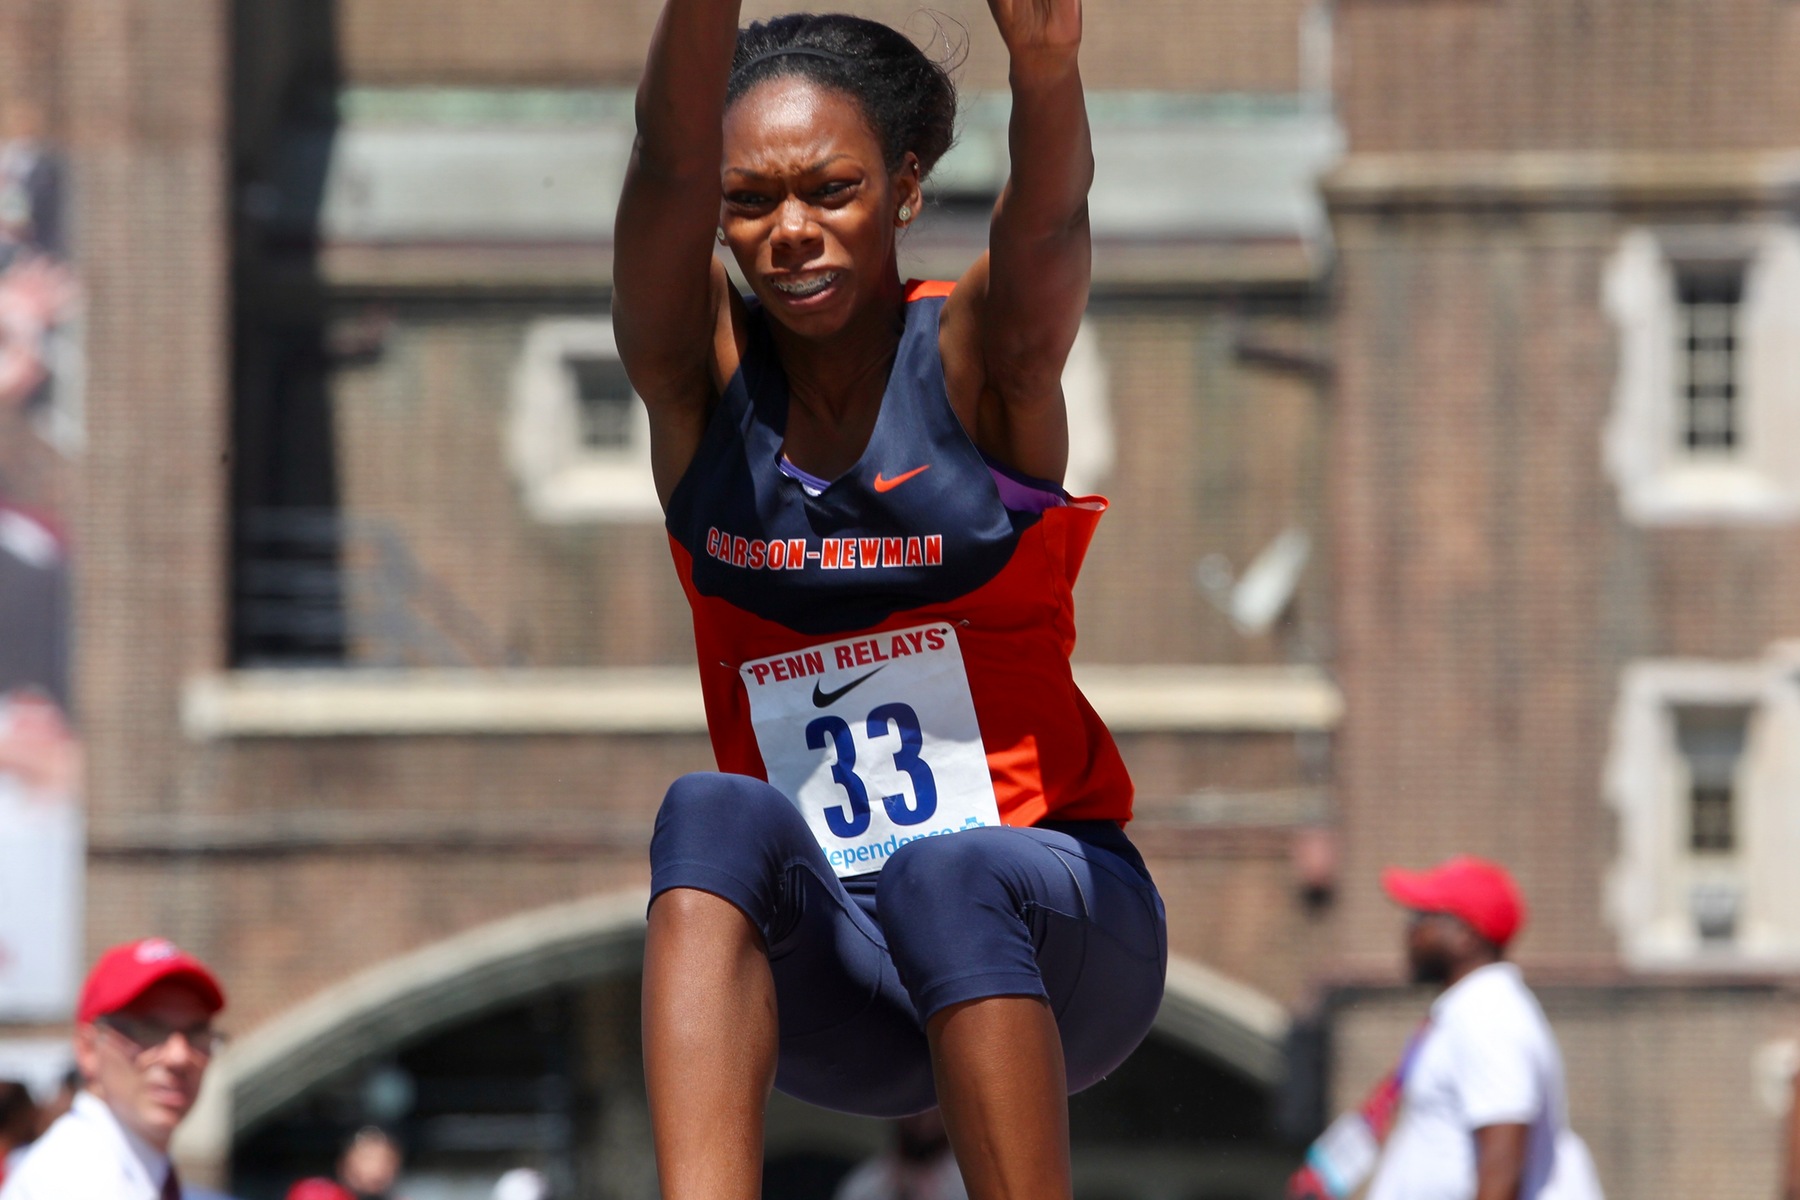 Four Track & Field athletes named to the USTFCCCA All-Academic Individuals list